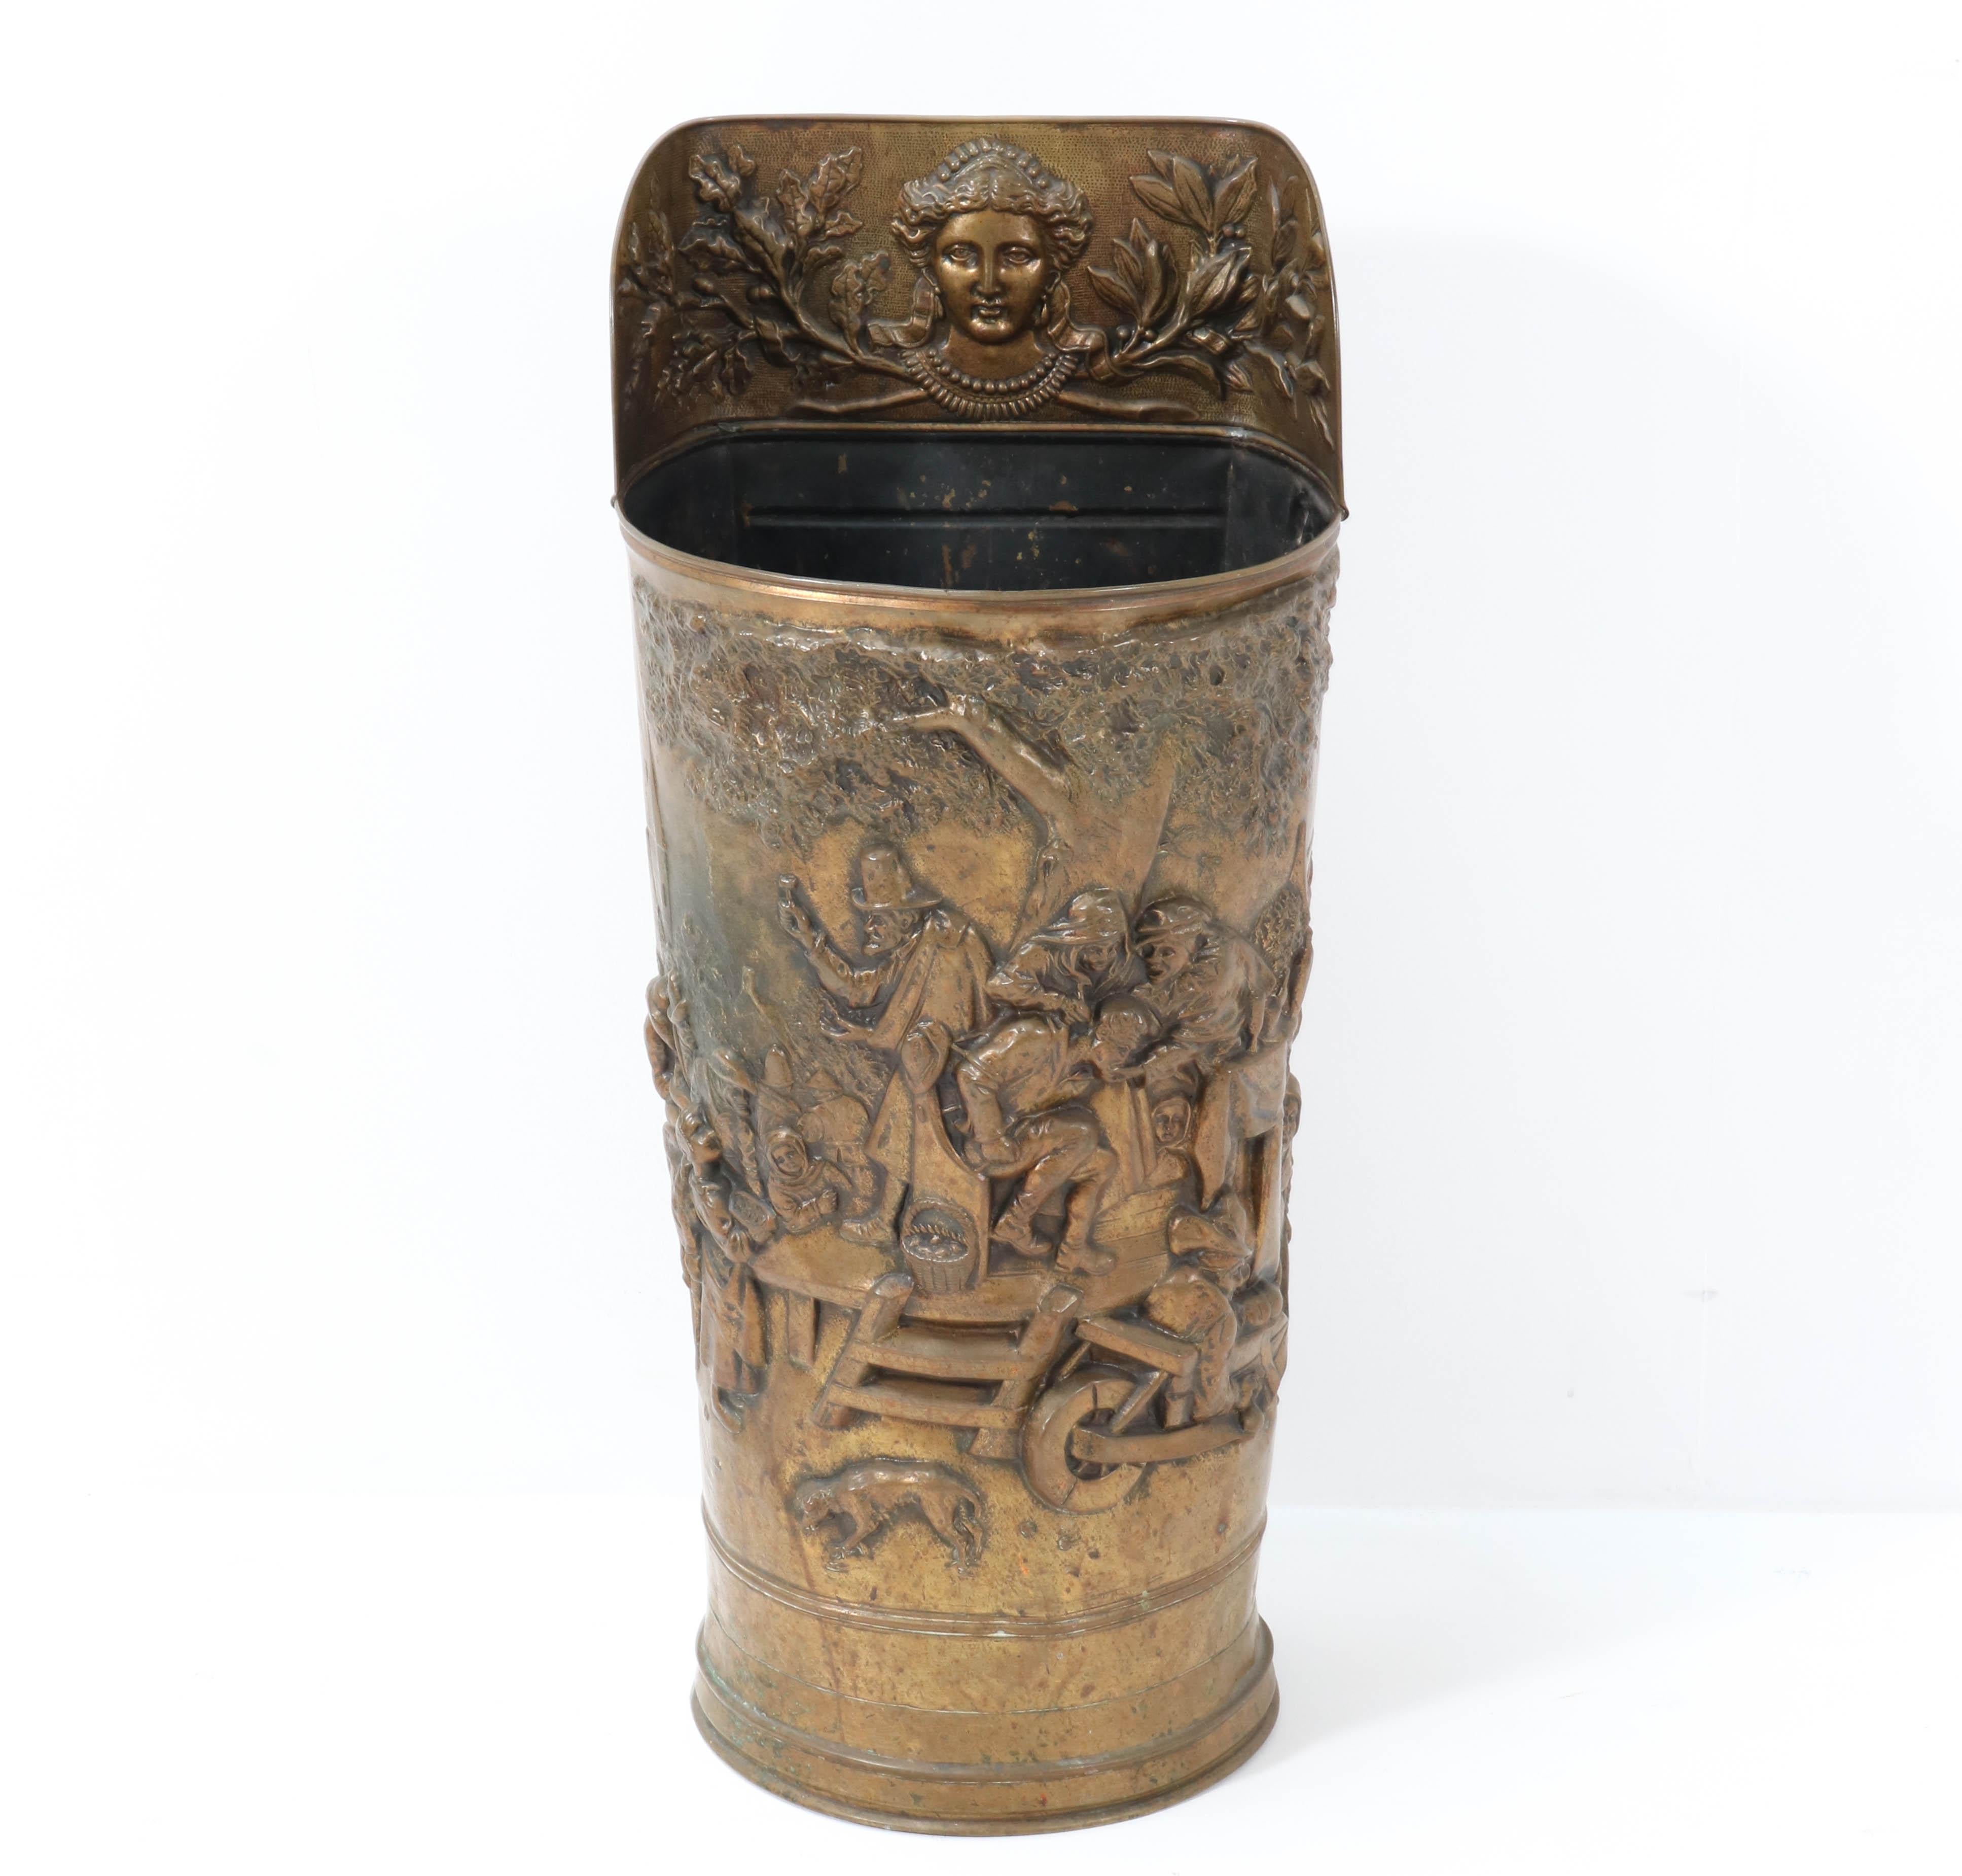 Stunning Renaissance Revival style umbrella stand or stick holder.
Striking Dutch design from the 1920s.
Hammered brass with a female head and other decorations.
This wonderful piece of furniture is a true gem in the hall way!
In very good